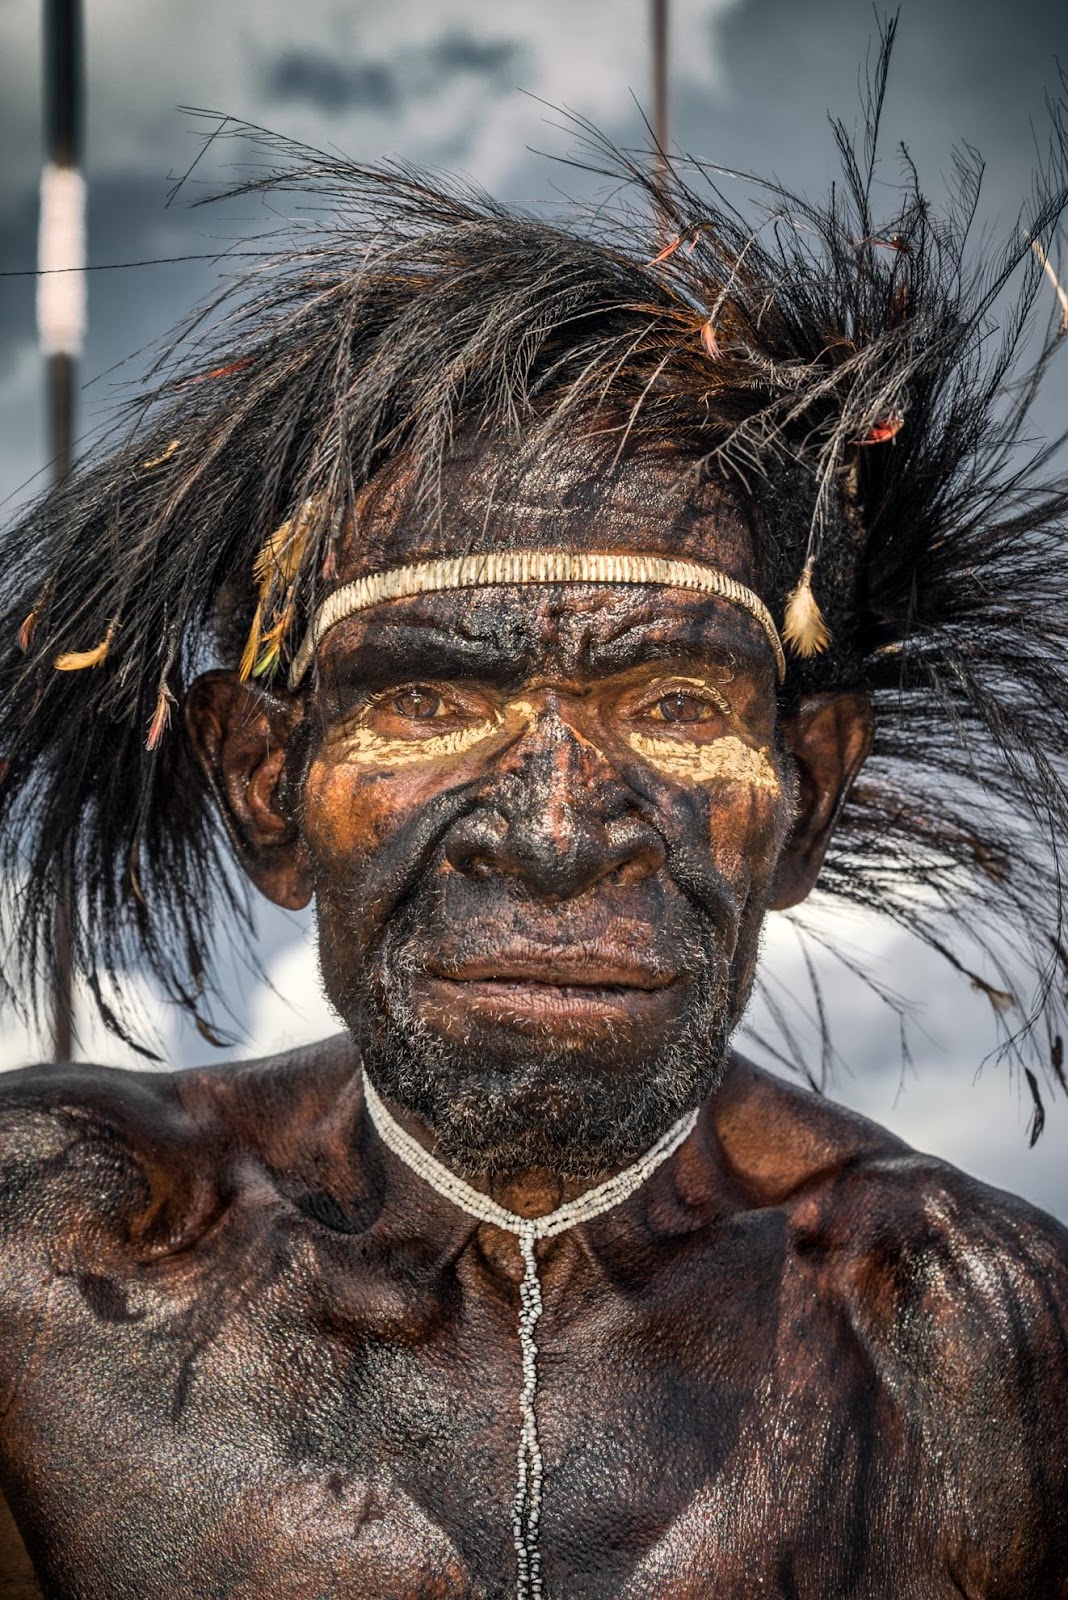 Creator/Contributor: famed Italian travel photographer, Roberto Pazzi; understated 2013 portrait brilliantly capturing the historical essence of the Dani Warrior from the Baliem Valley, West Papua (Indonesia).